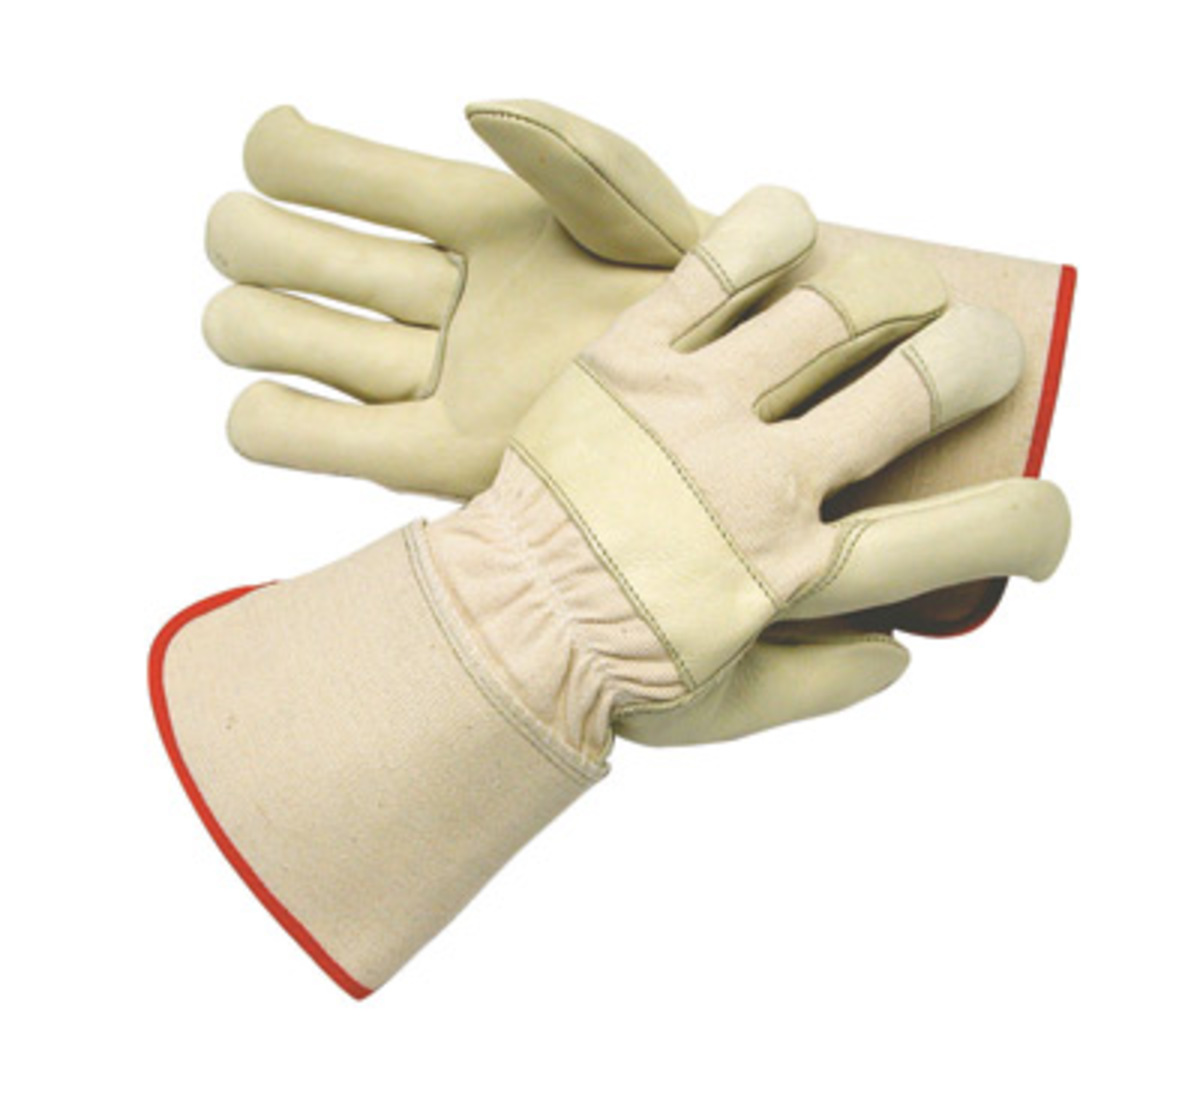 Full-Grain Cowhide Leather Work Gloves, Large